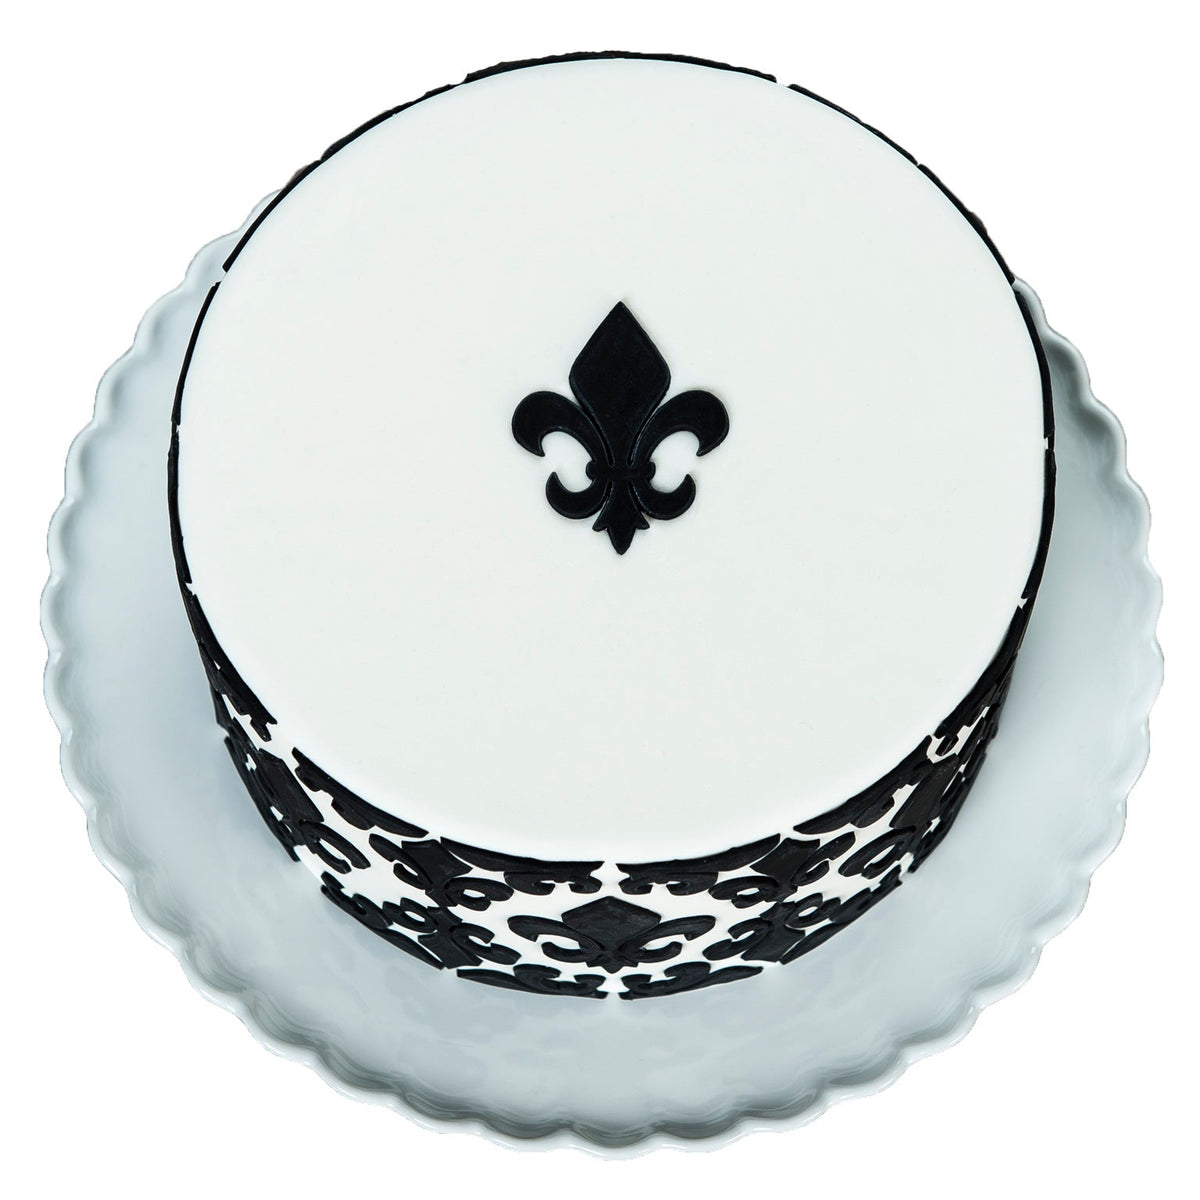 Decorated Cake image showing the Fleur de Lis Medallion Food Safe Silicone Onlay for Fondant Cake Decorating by Marvelous Molds